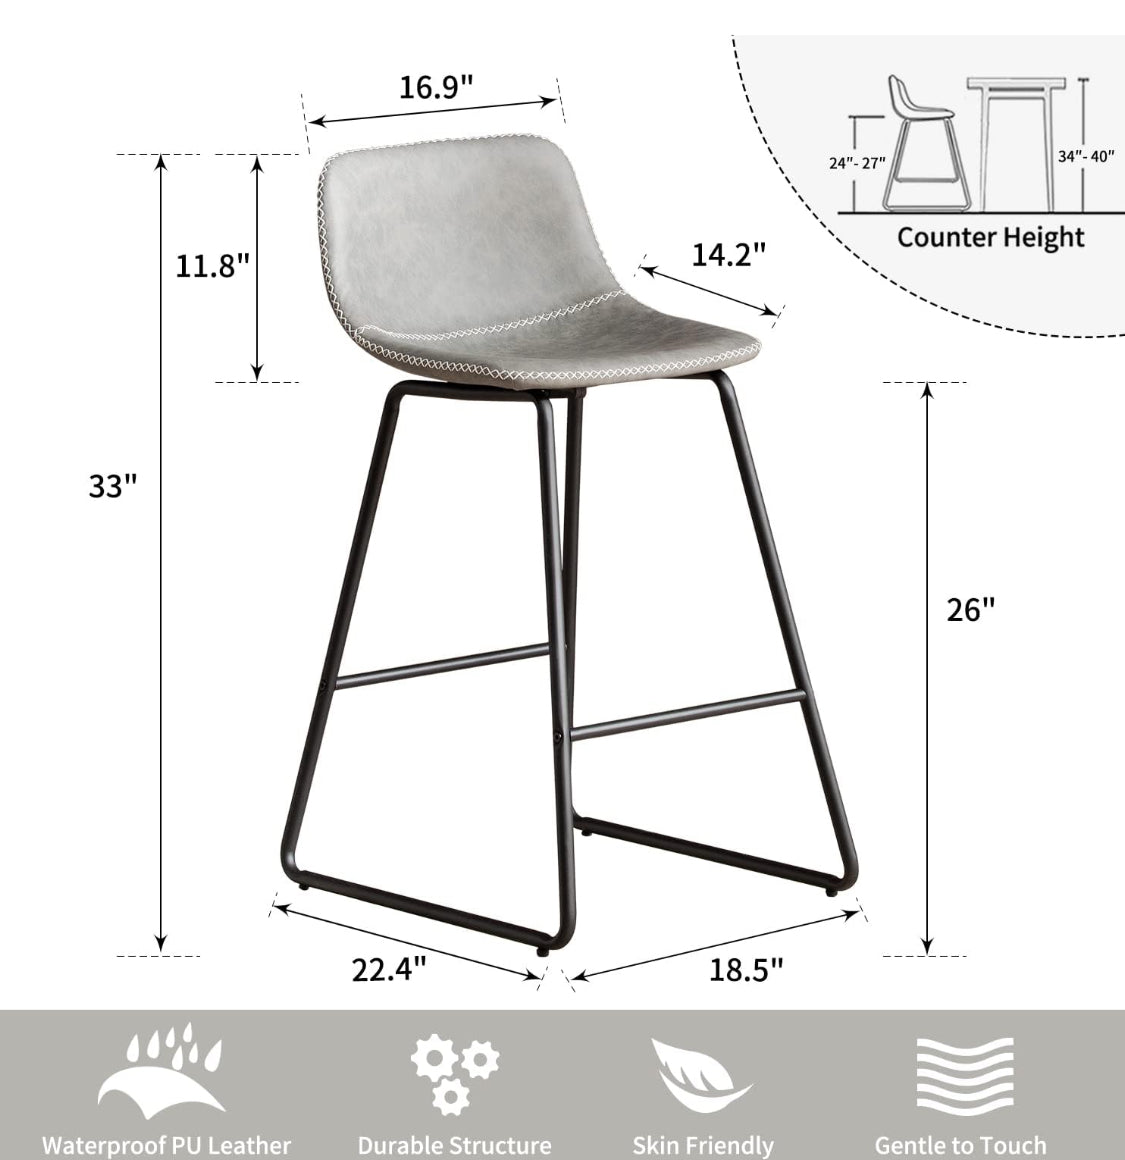 HeuGah Counter Height Bar Stools Set of 4, Counter Stools with Backs, Modern Barstools for Kitchen Island, Bar Stools 26 Inch Seat Height (Grey, 4 pcs 26'' Counter Height barstools)